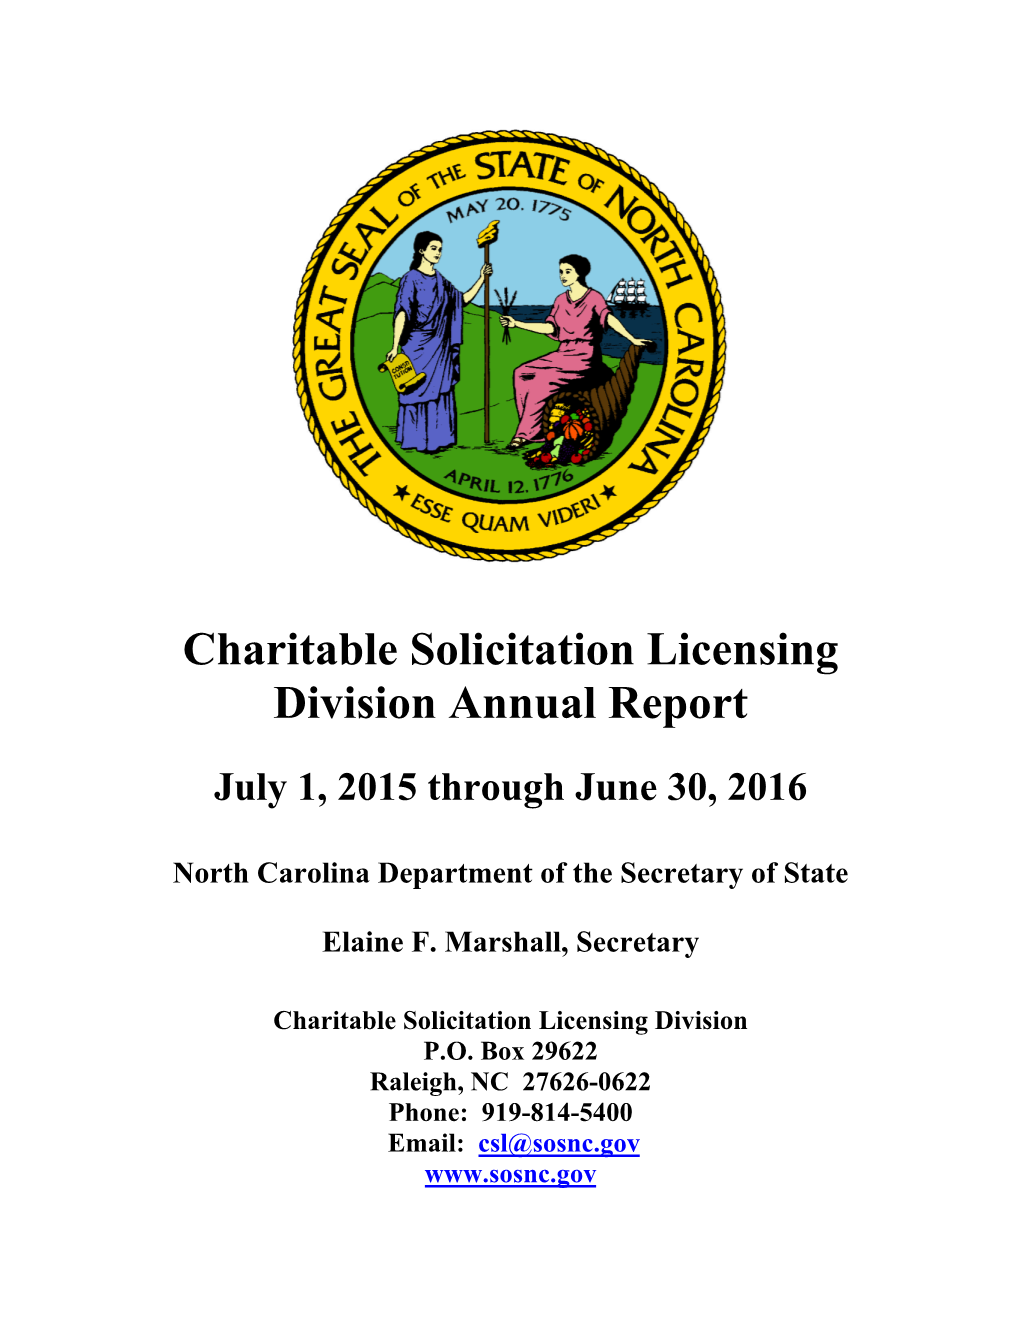 Charitable Solicitation Licensing Division Annual Report